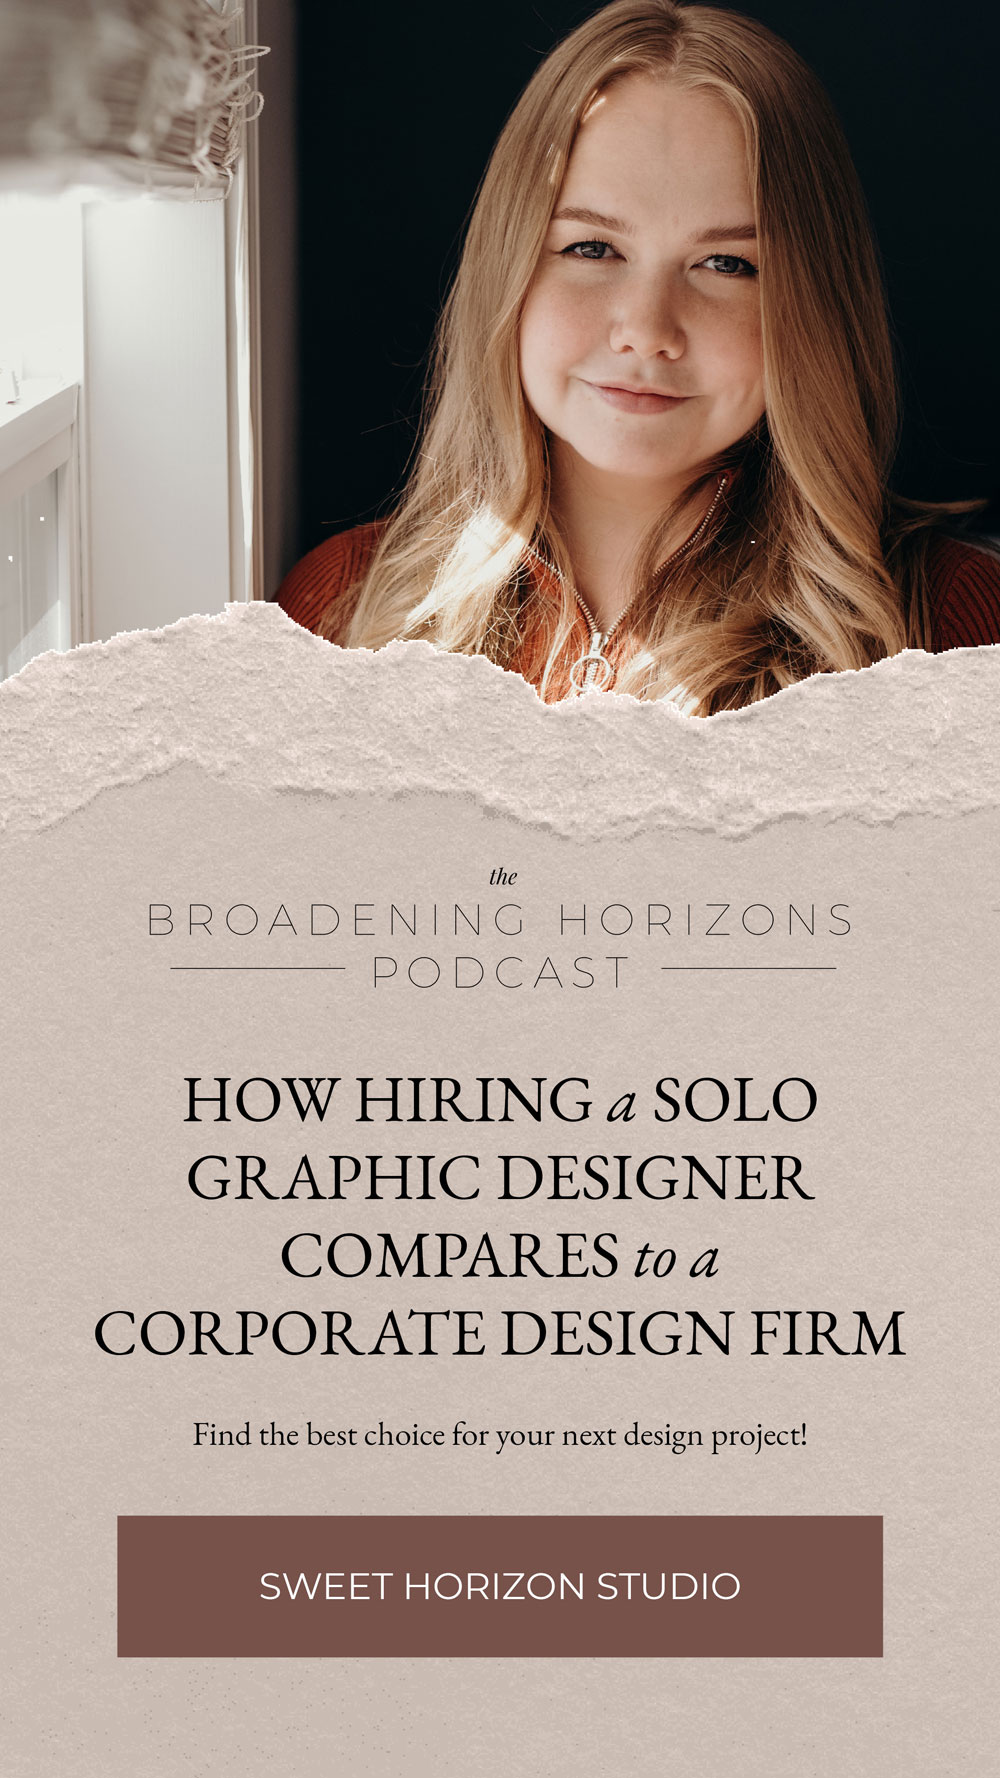 How hiring a solo graphic designer compares to a corporate design firm from www.sweethorizonblog.com